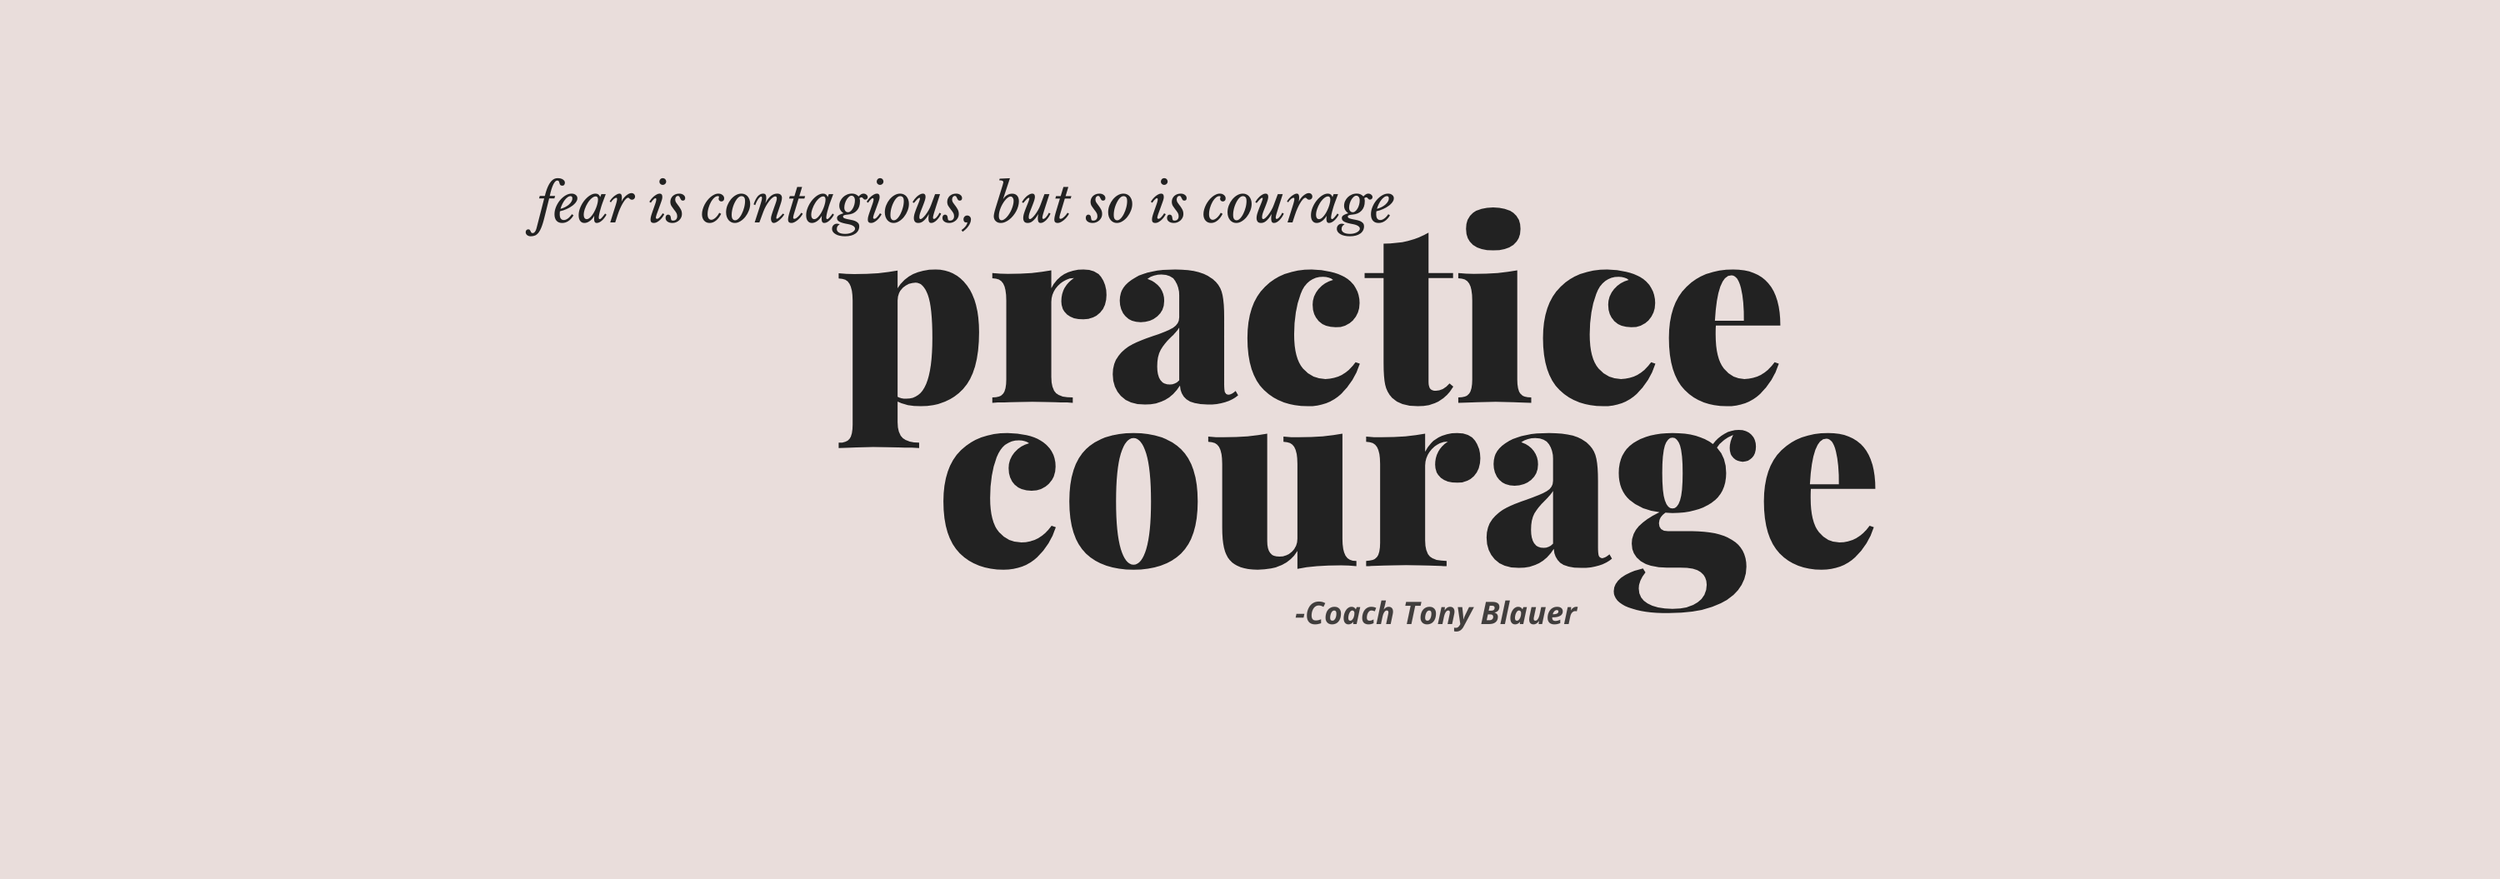 fear Is contagious, but so Is courage..png